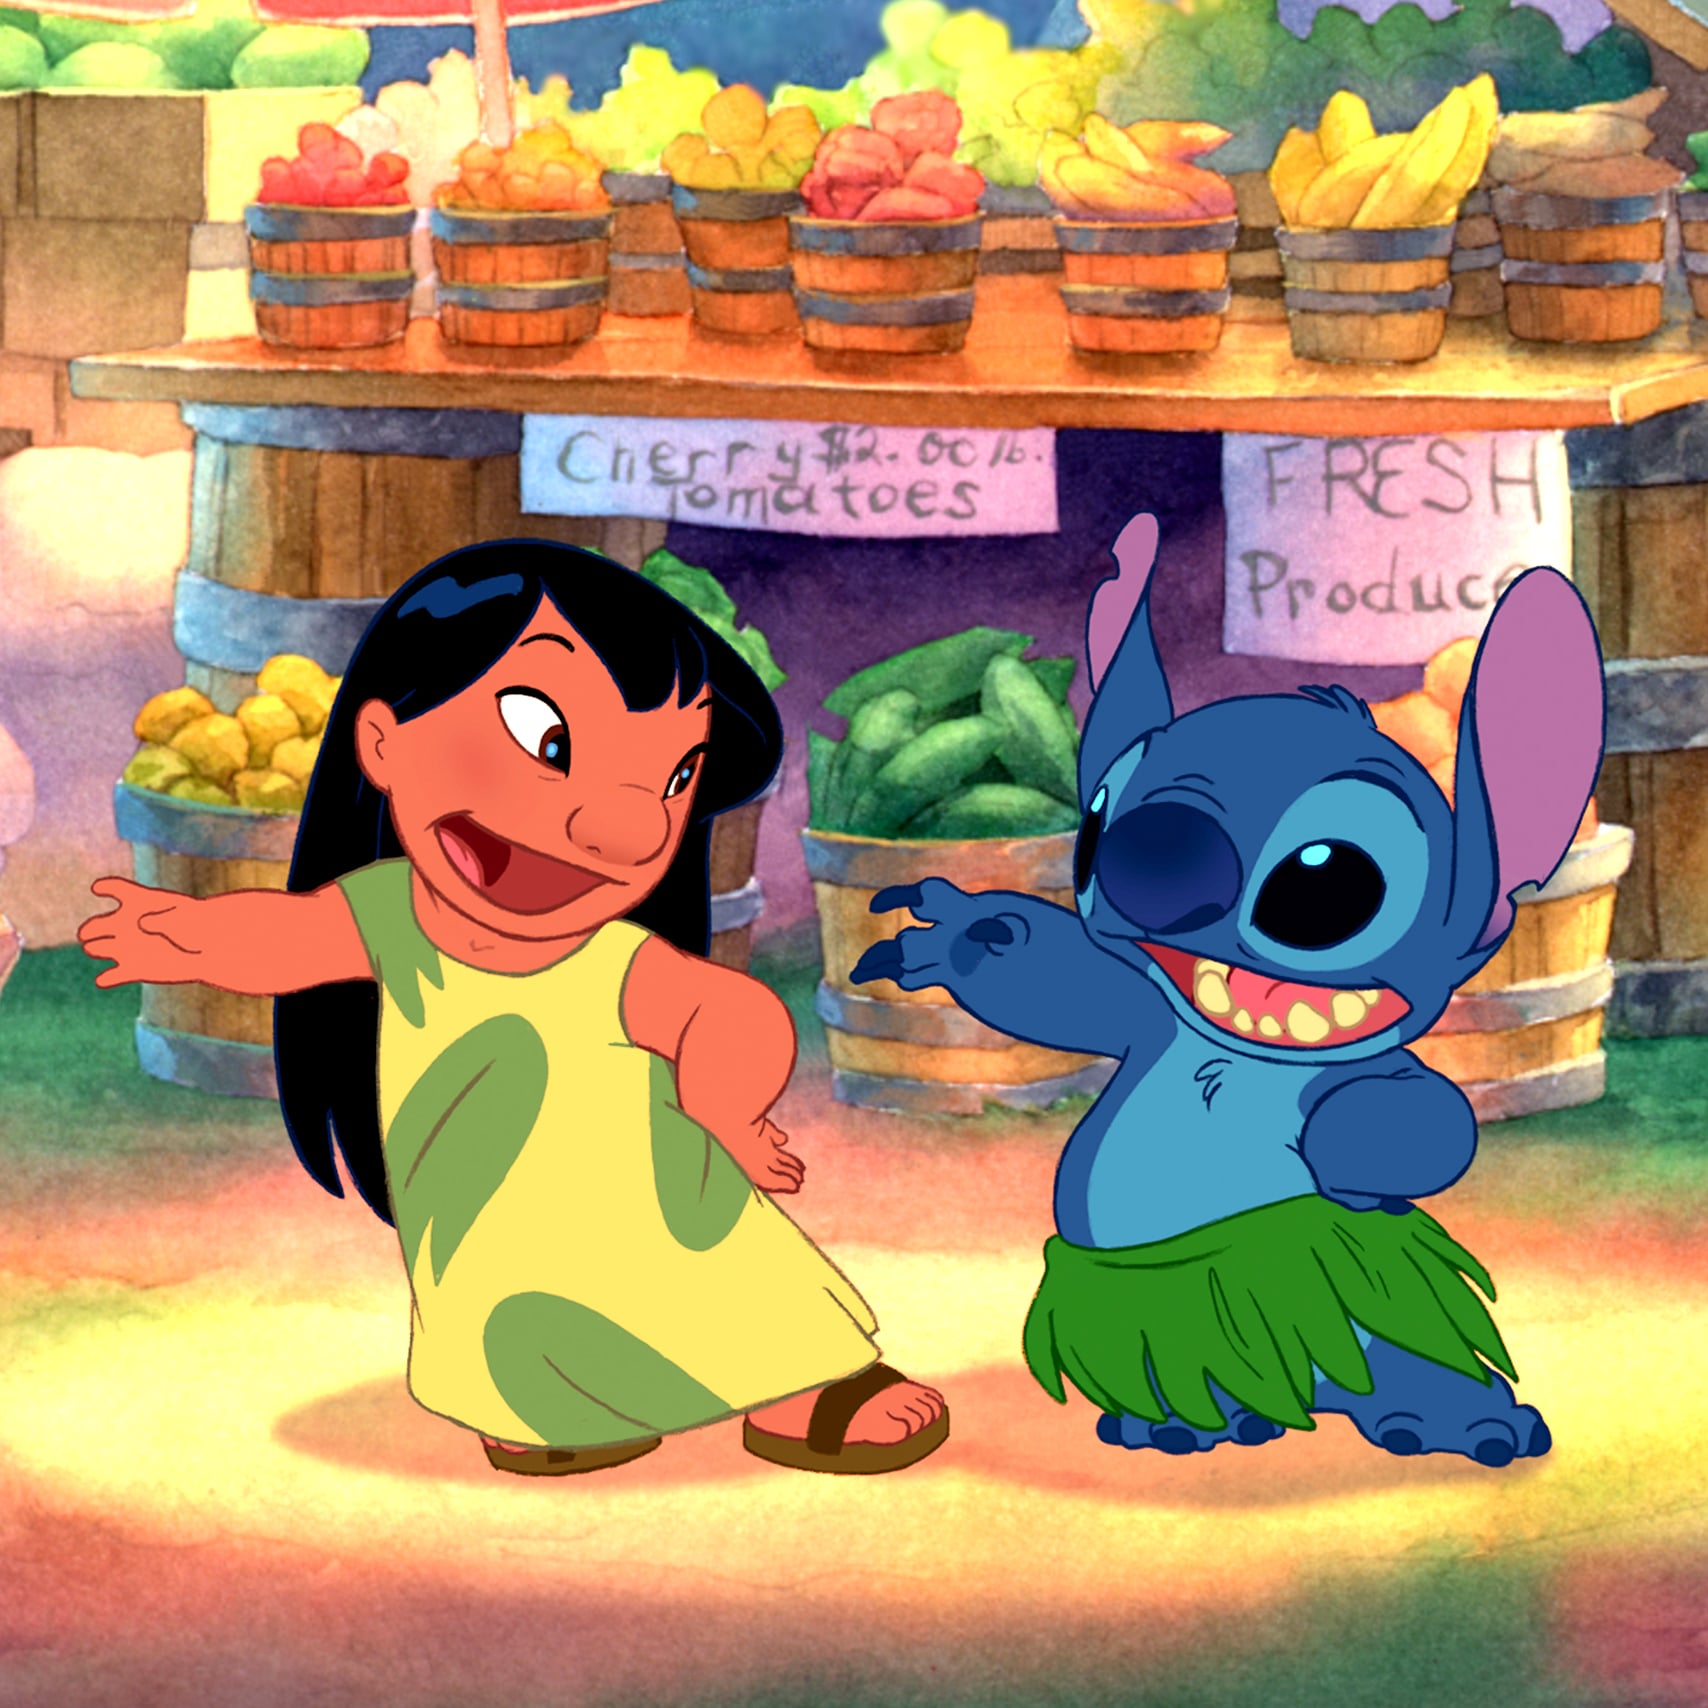 In Disney's animated film Lilo and Stitch™, during the pet rescue